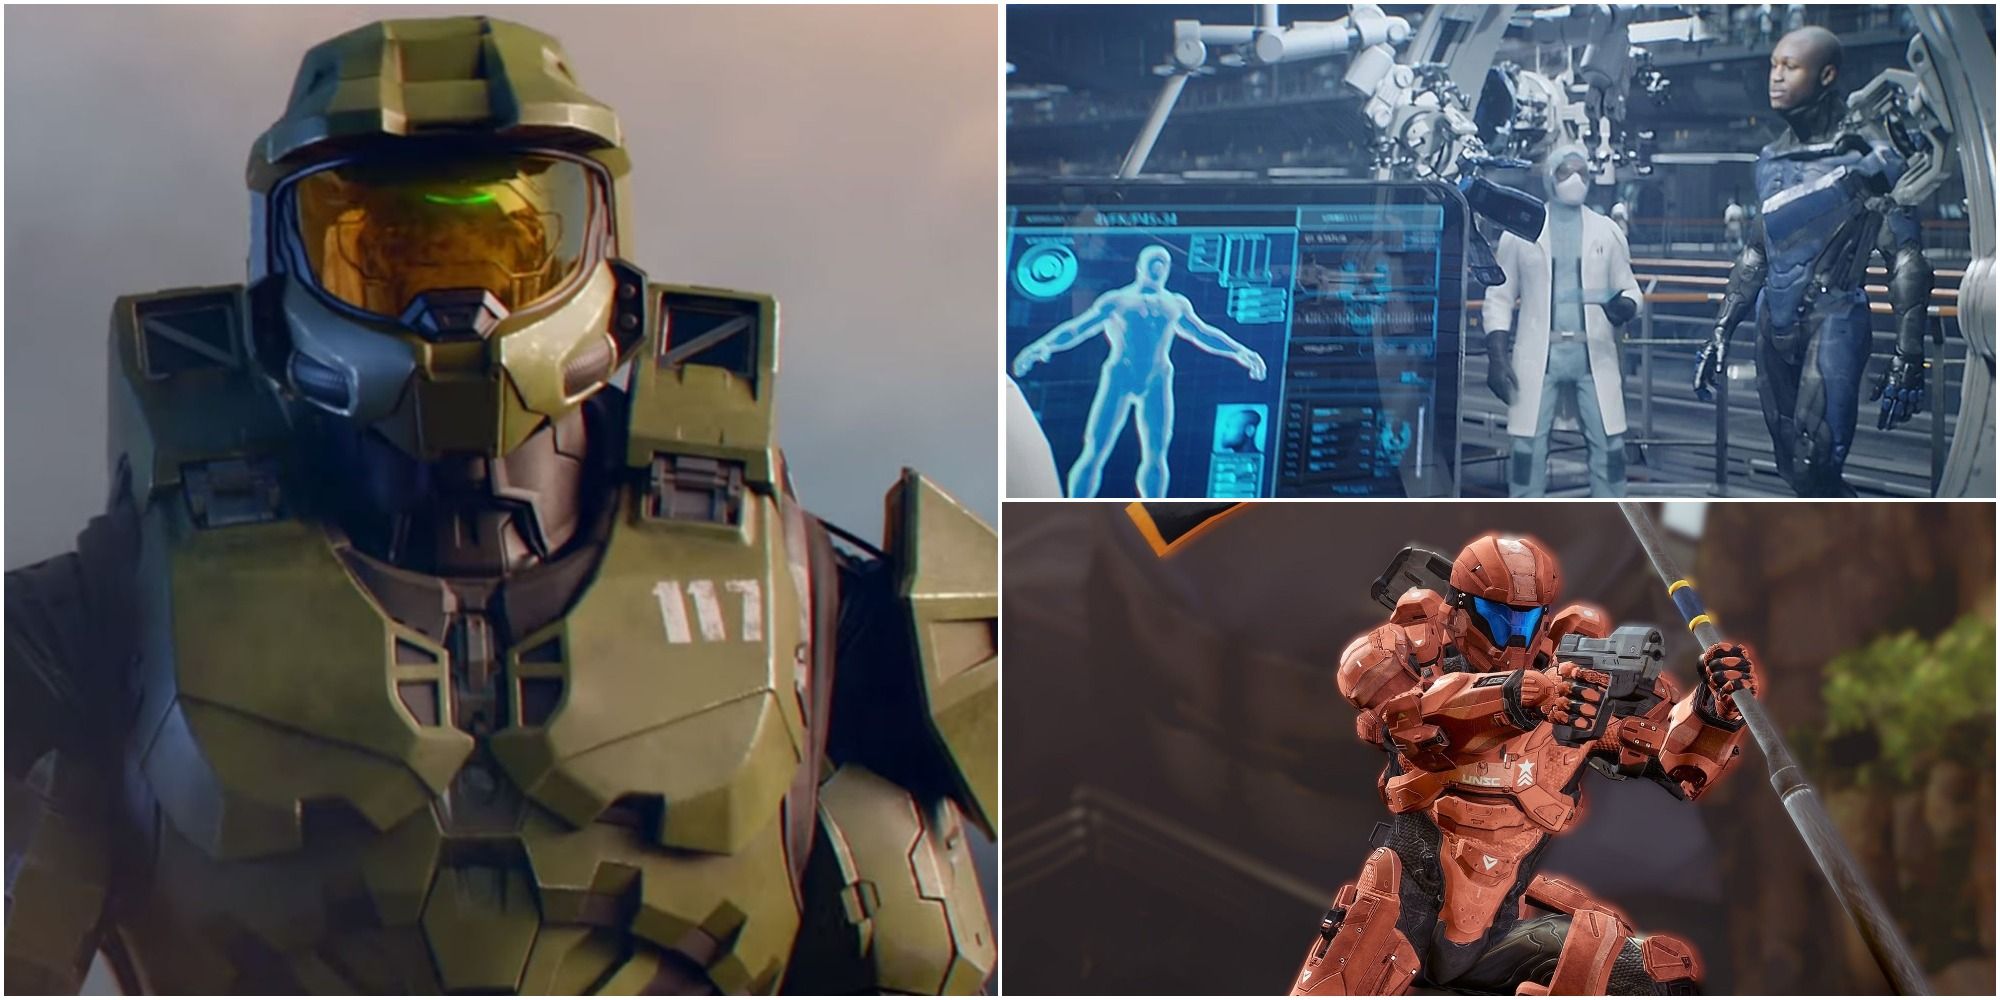 Halo: Master Chief, The Spartan Programme And Mark IV Armor